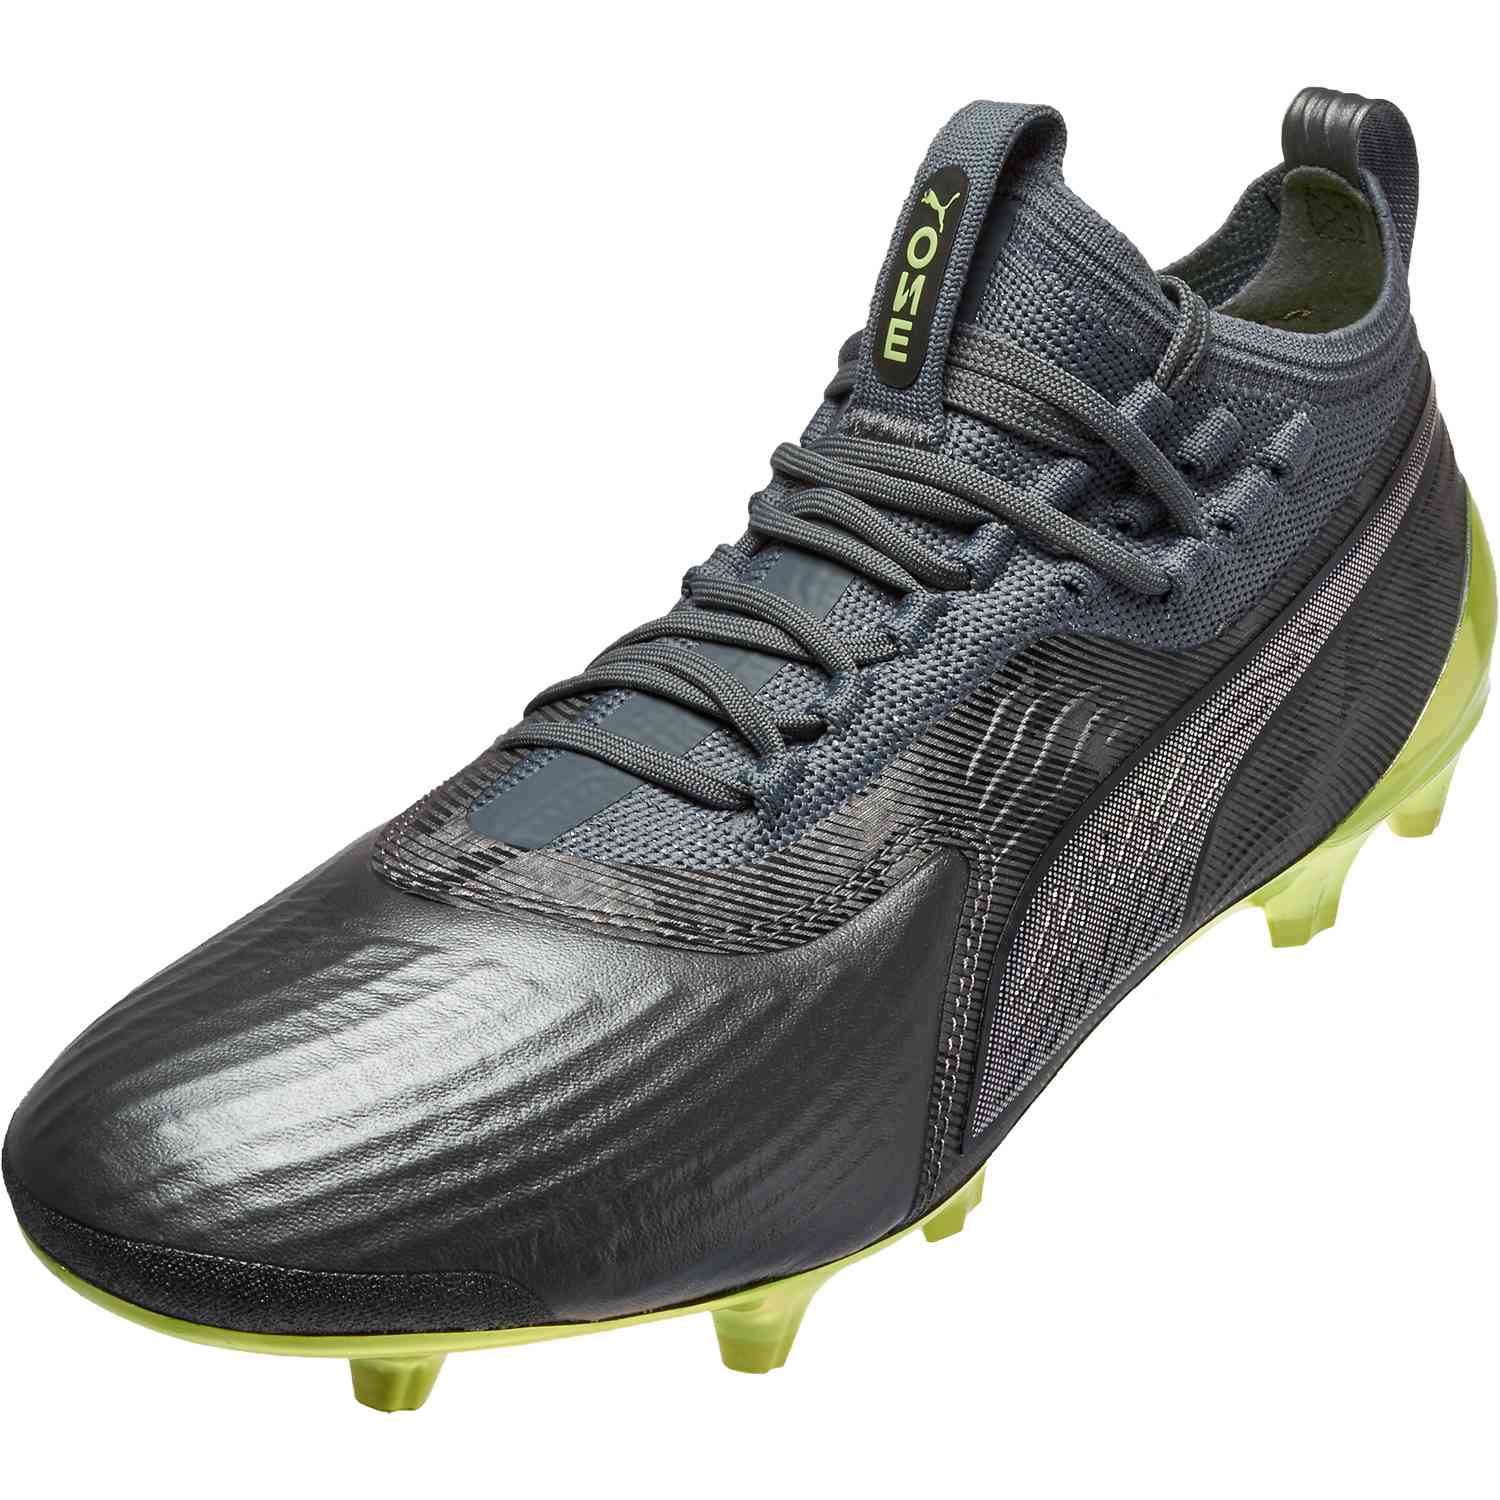 puma limited edition boots